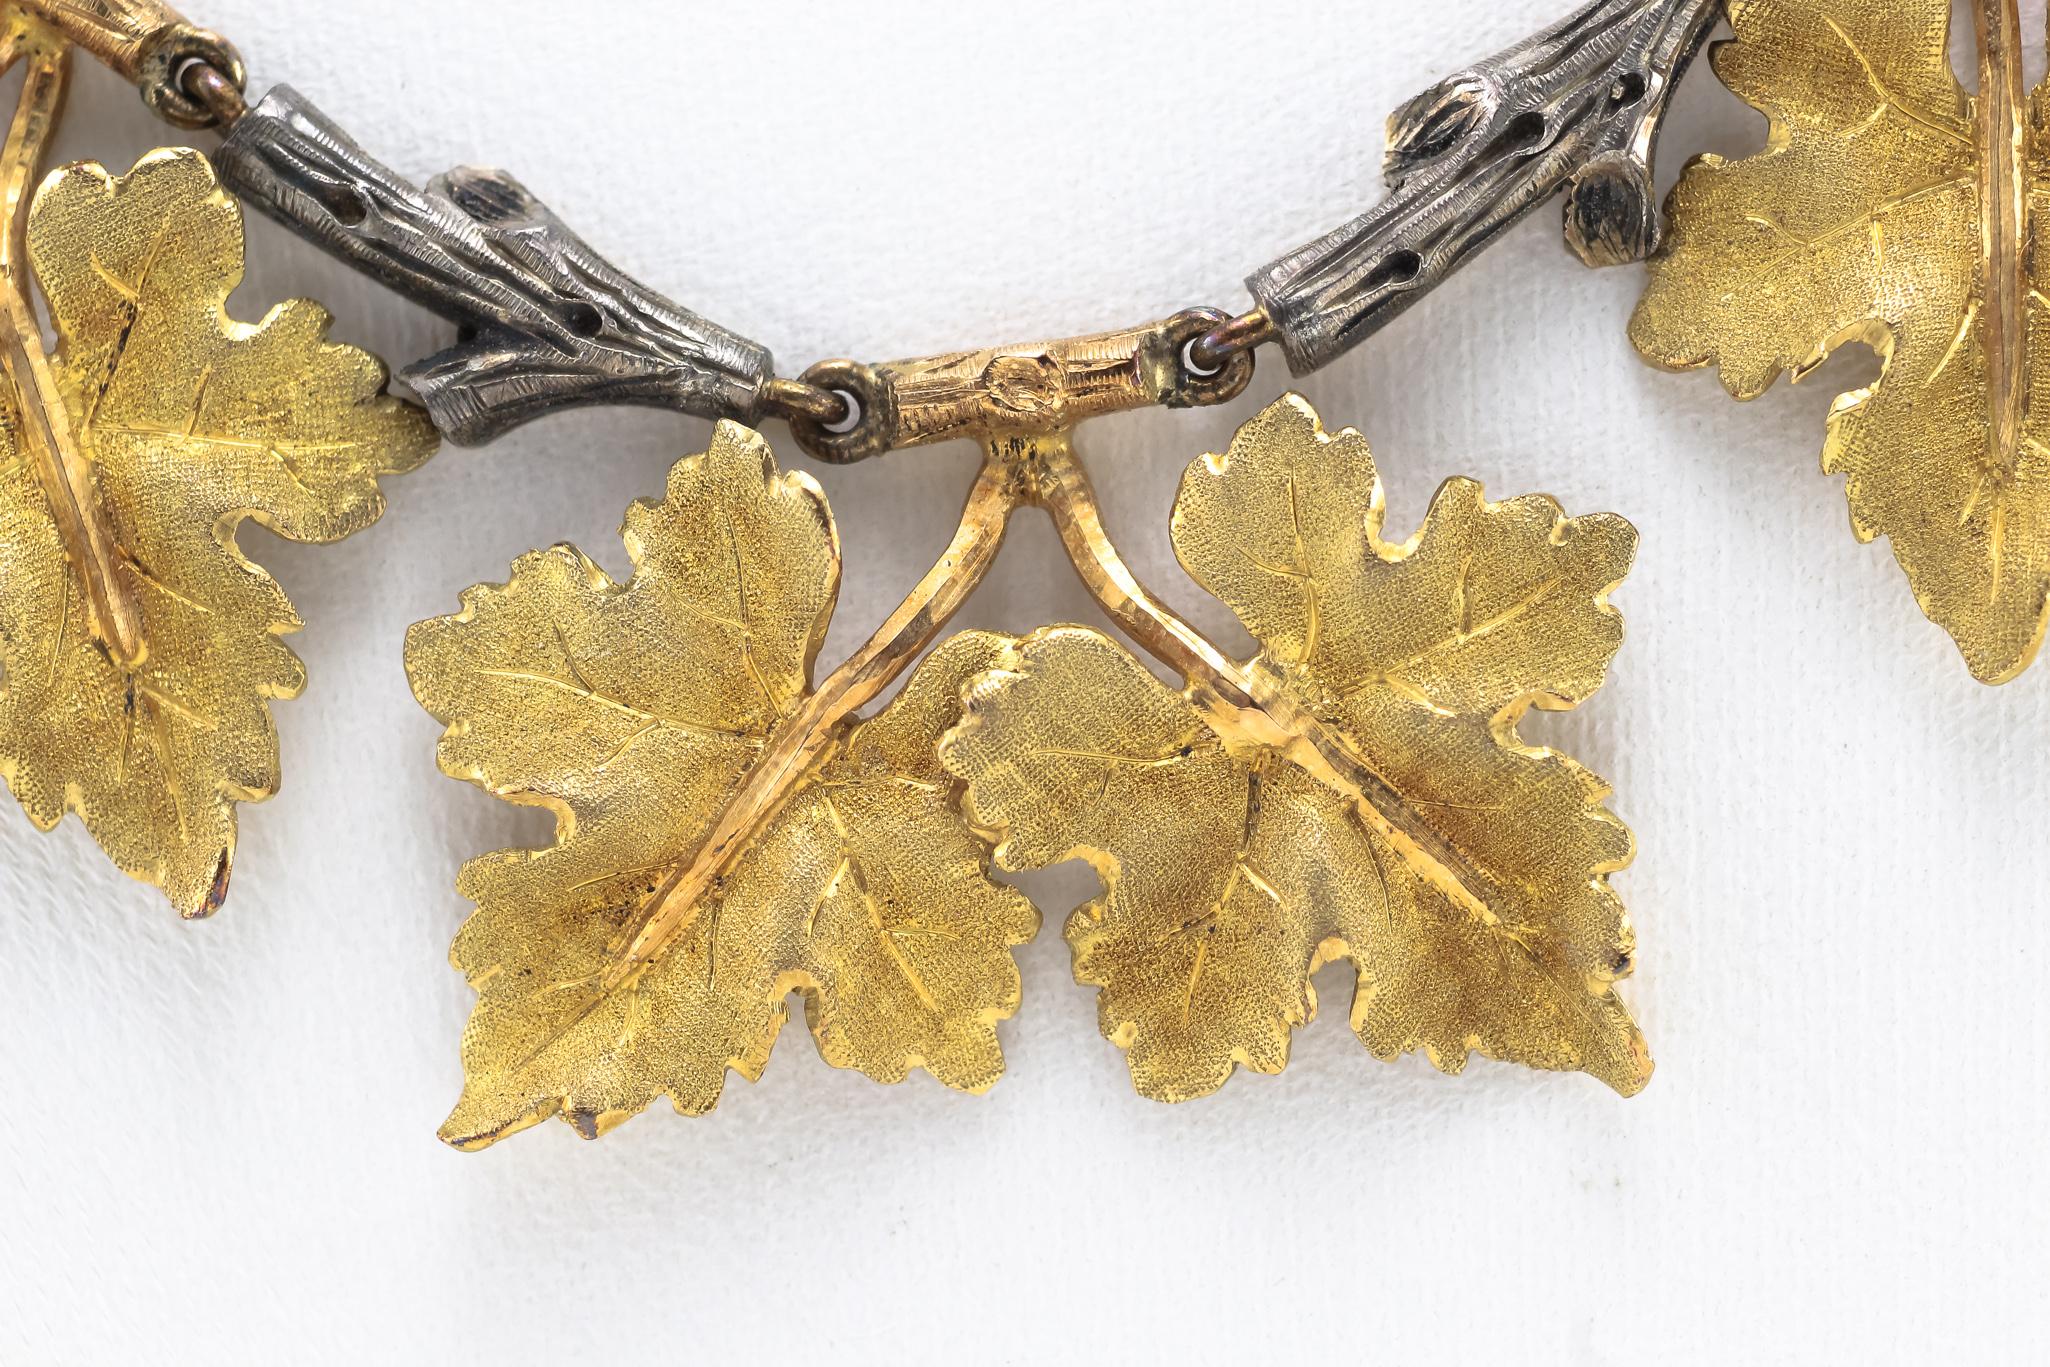 A Genuine M. Buccellati Necklace that features The Quintessential Grape Leaf Motif.  Masterfully crafted from Solid 18 Karat Yellow and White Gold, this exceptional piece features both Buccellati's highly specialized engraving techniques and his